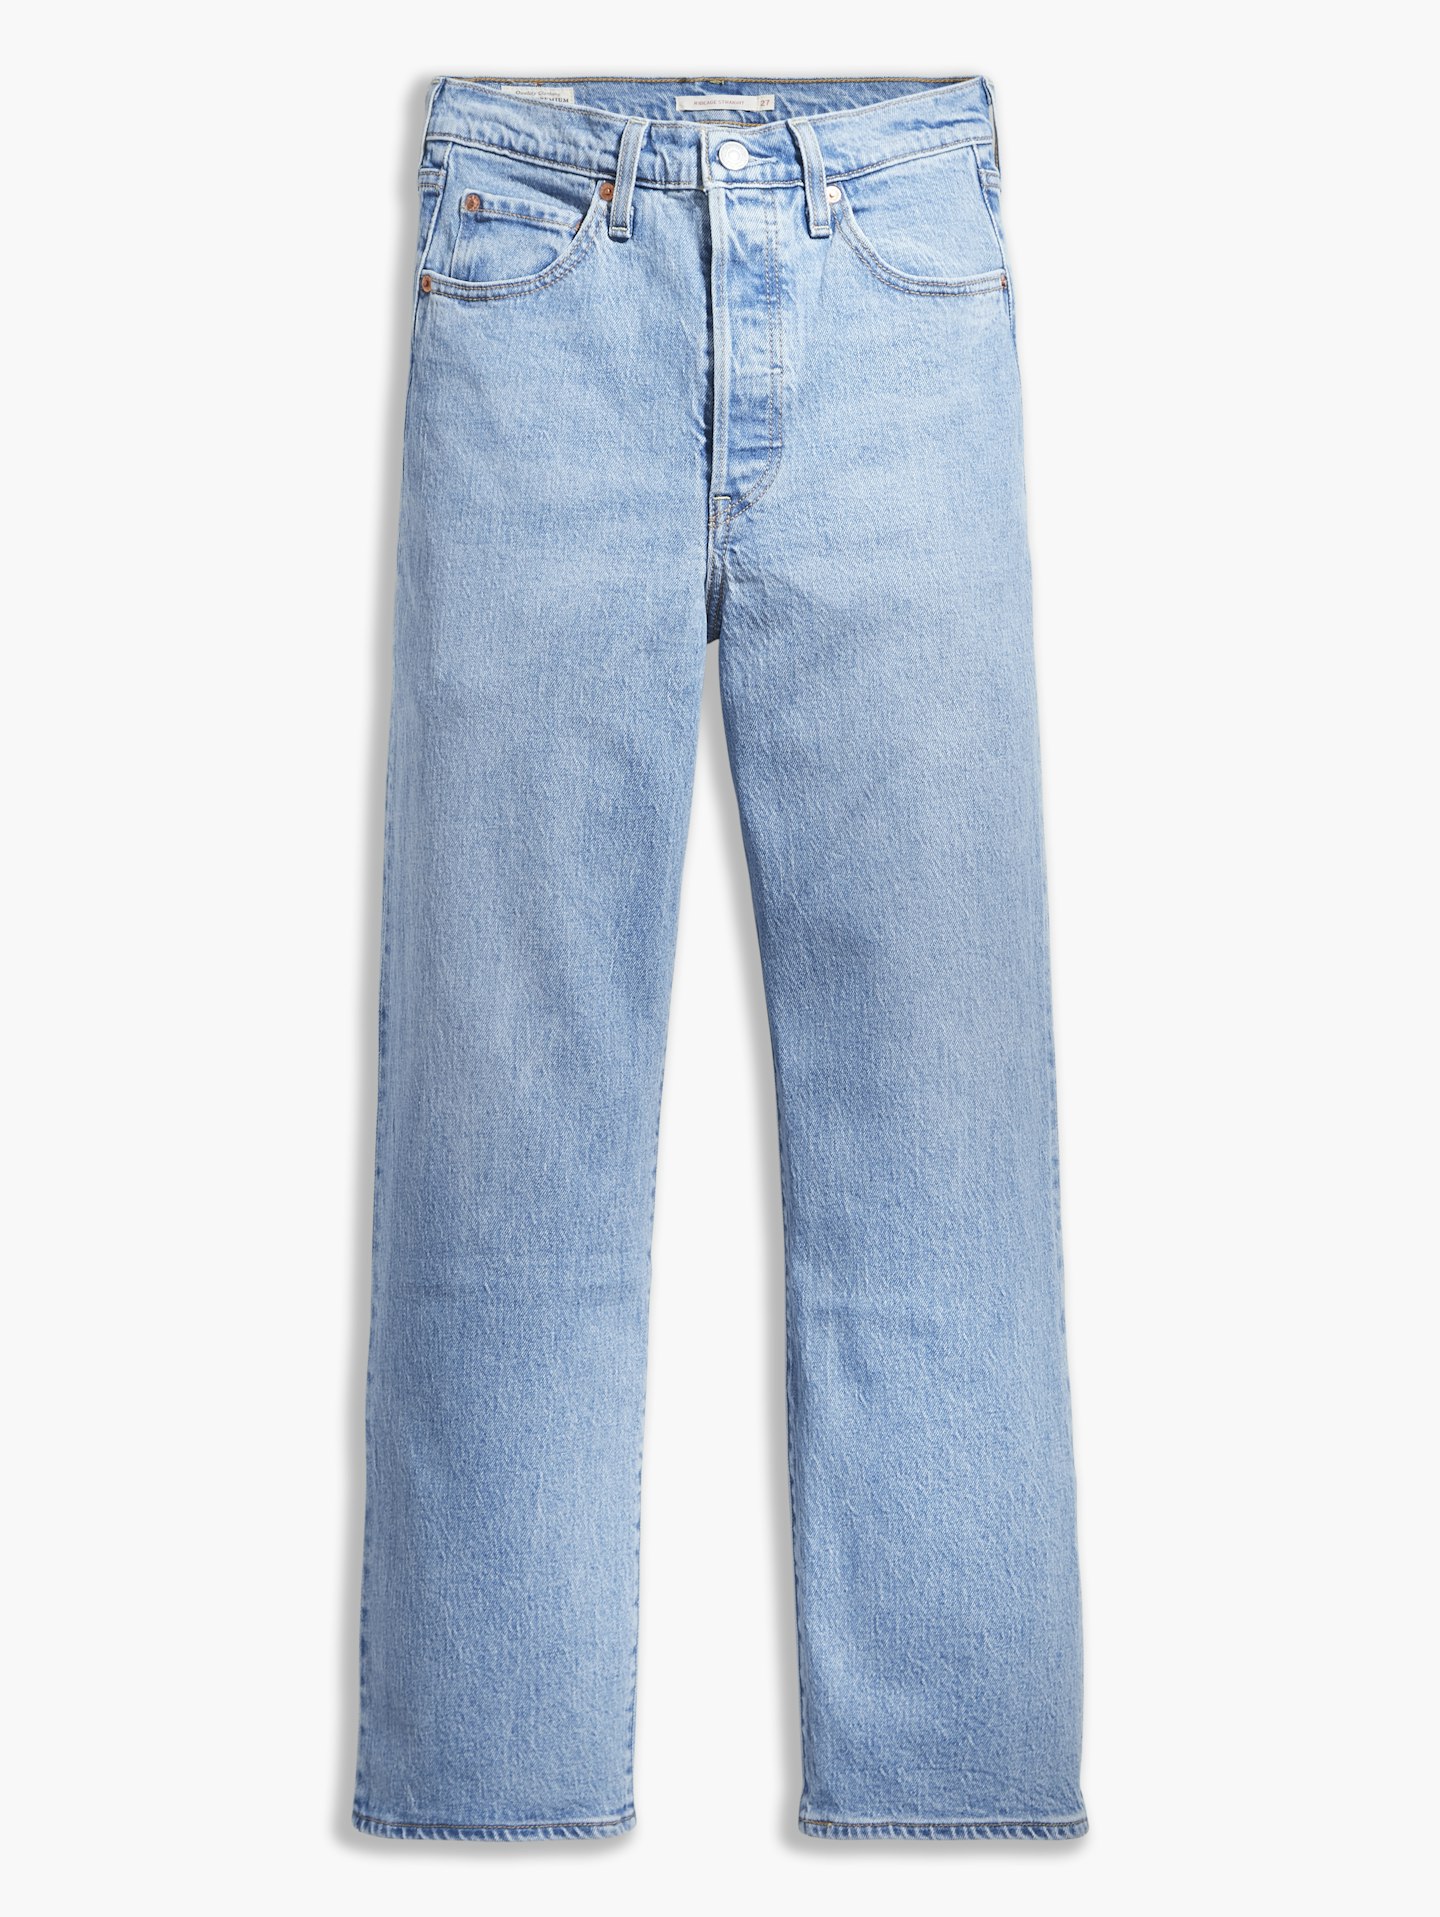 Levi's, Ribcage Straight Ankle Jeans, £95 at John Lewis & Partners